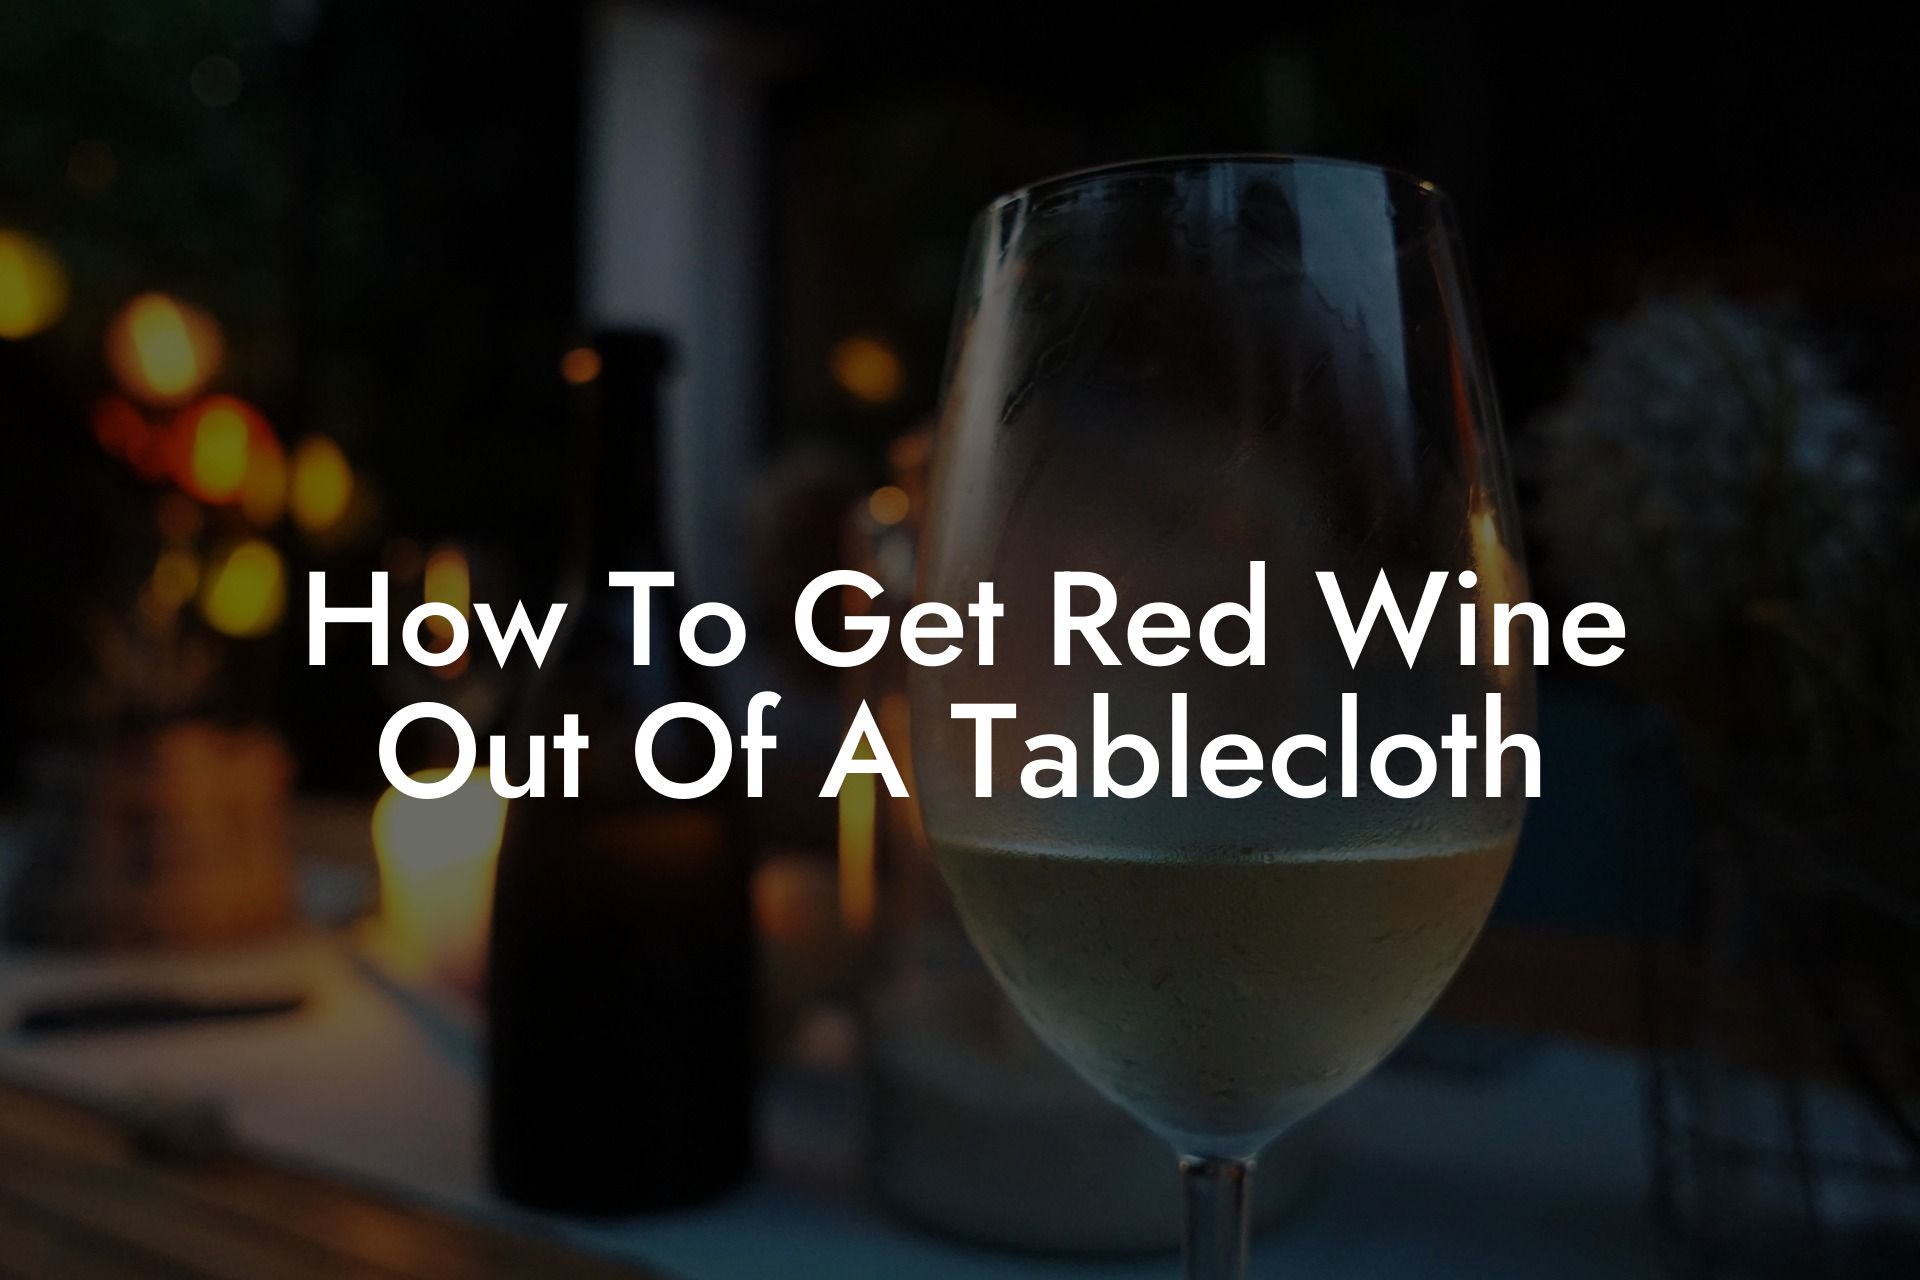 How To Get Red Wine Out Of A Tablecloth